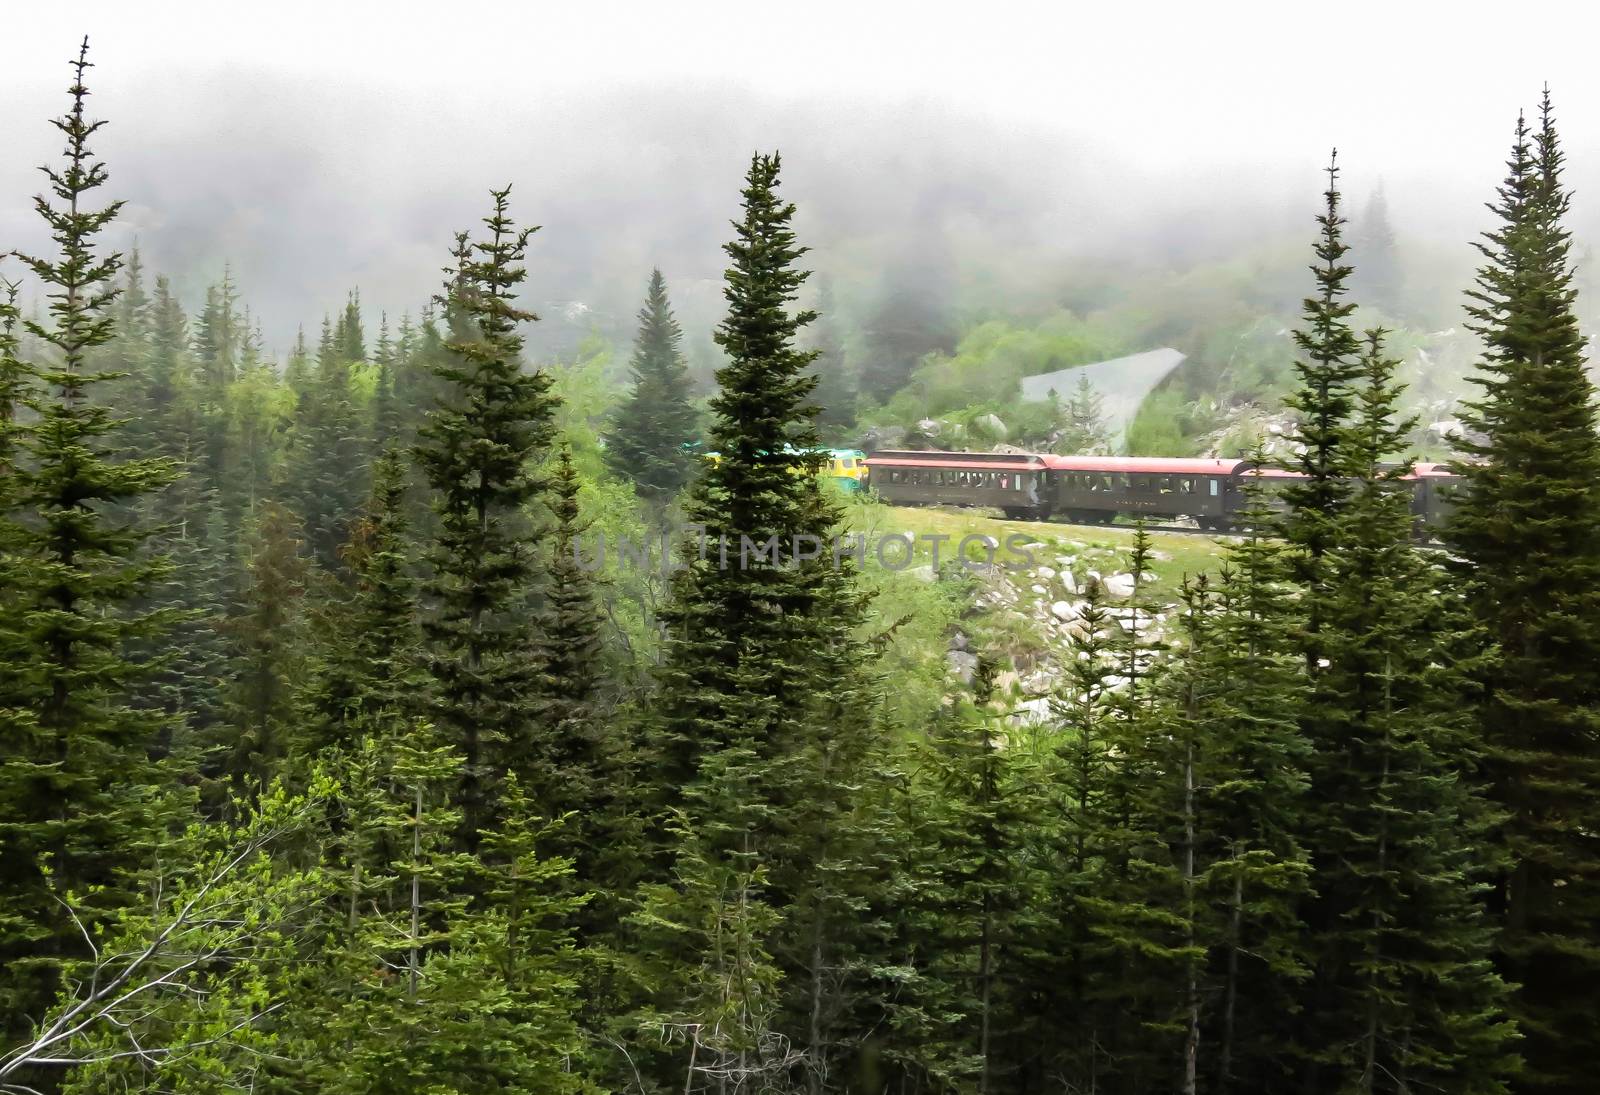 Railroad from Skagway, Alaska heading up to the Canadian border. The White Pass line takes tourists on excursions on the old rail line used for the gold rush.